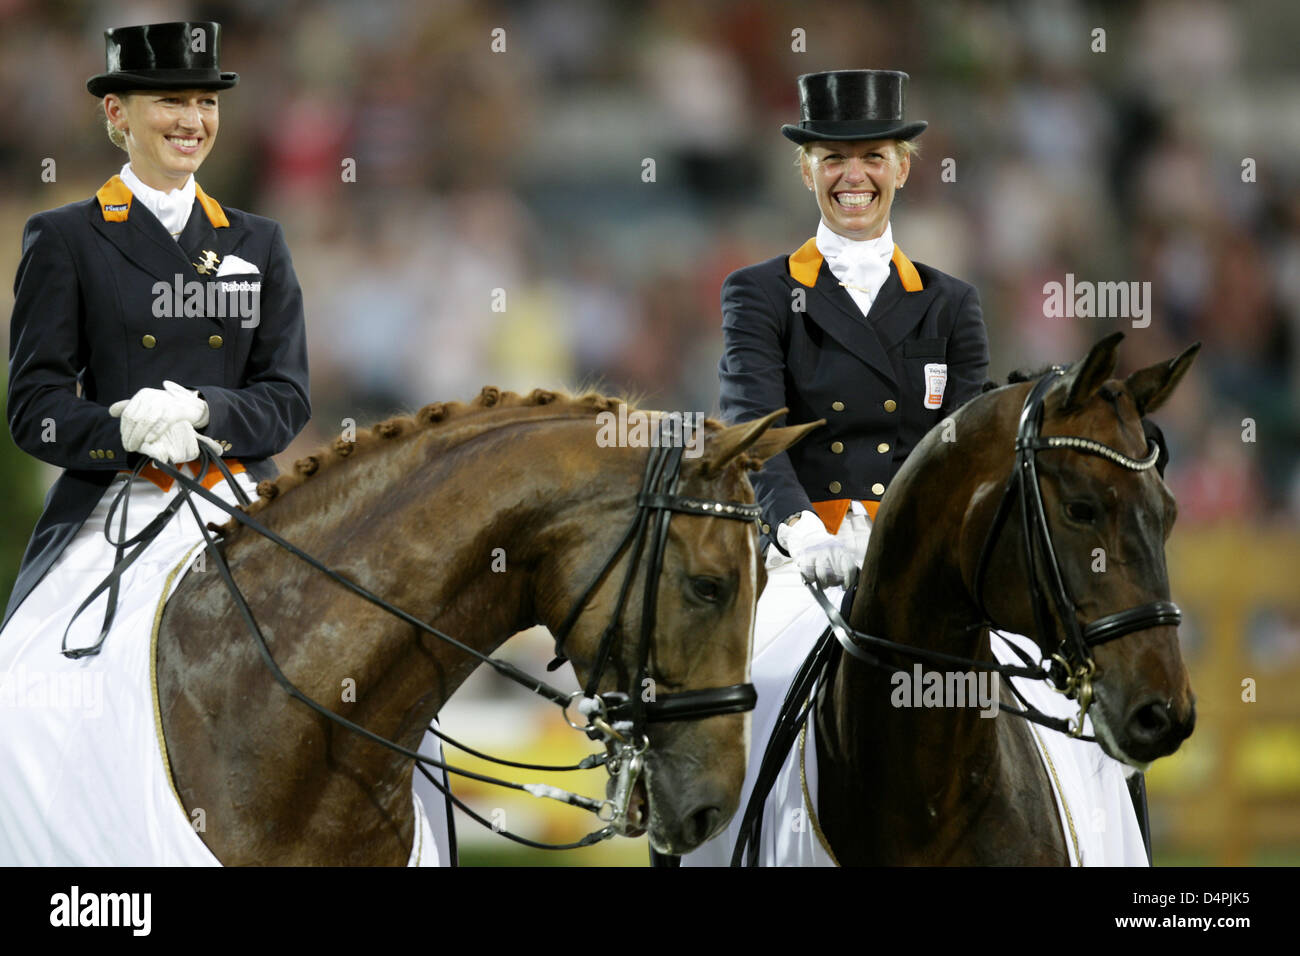 Dutch dressage riders Anky van Grunsven (R) and Marlies van Baalen smile while they sit on their horses at the World Equestrian Festival CHIO Aachen, Germany, 02 July 2009. The German team for the first time only won the silver medal in the Nations Cup of the world?s largest riding competition; the Dutch team finished on the first place. Photo: Rolf Vennenbernd Stock Photo